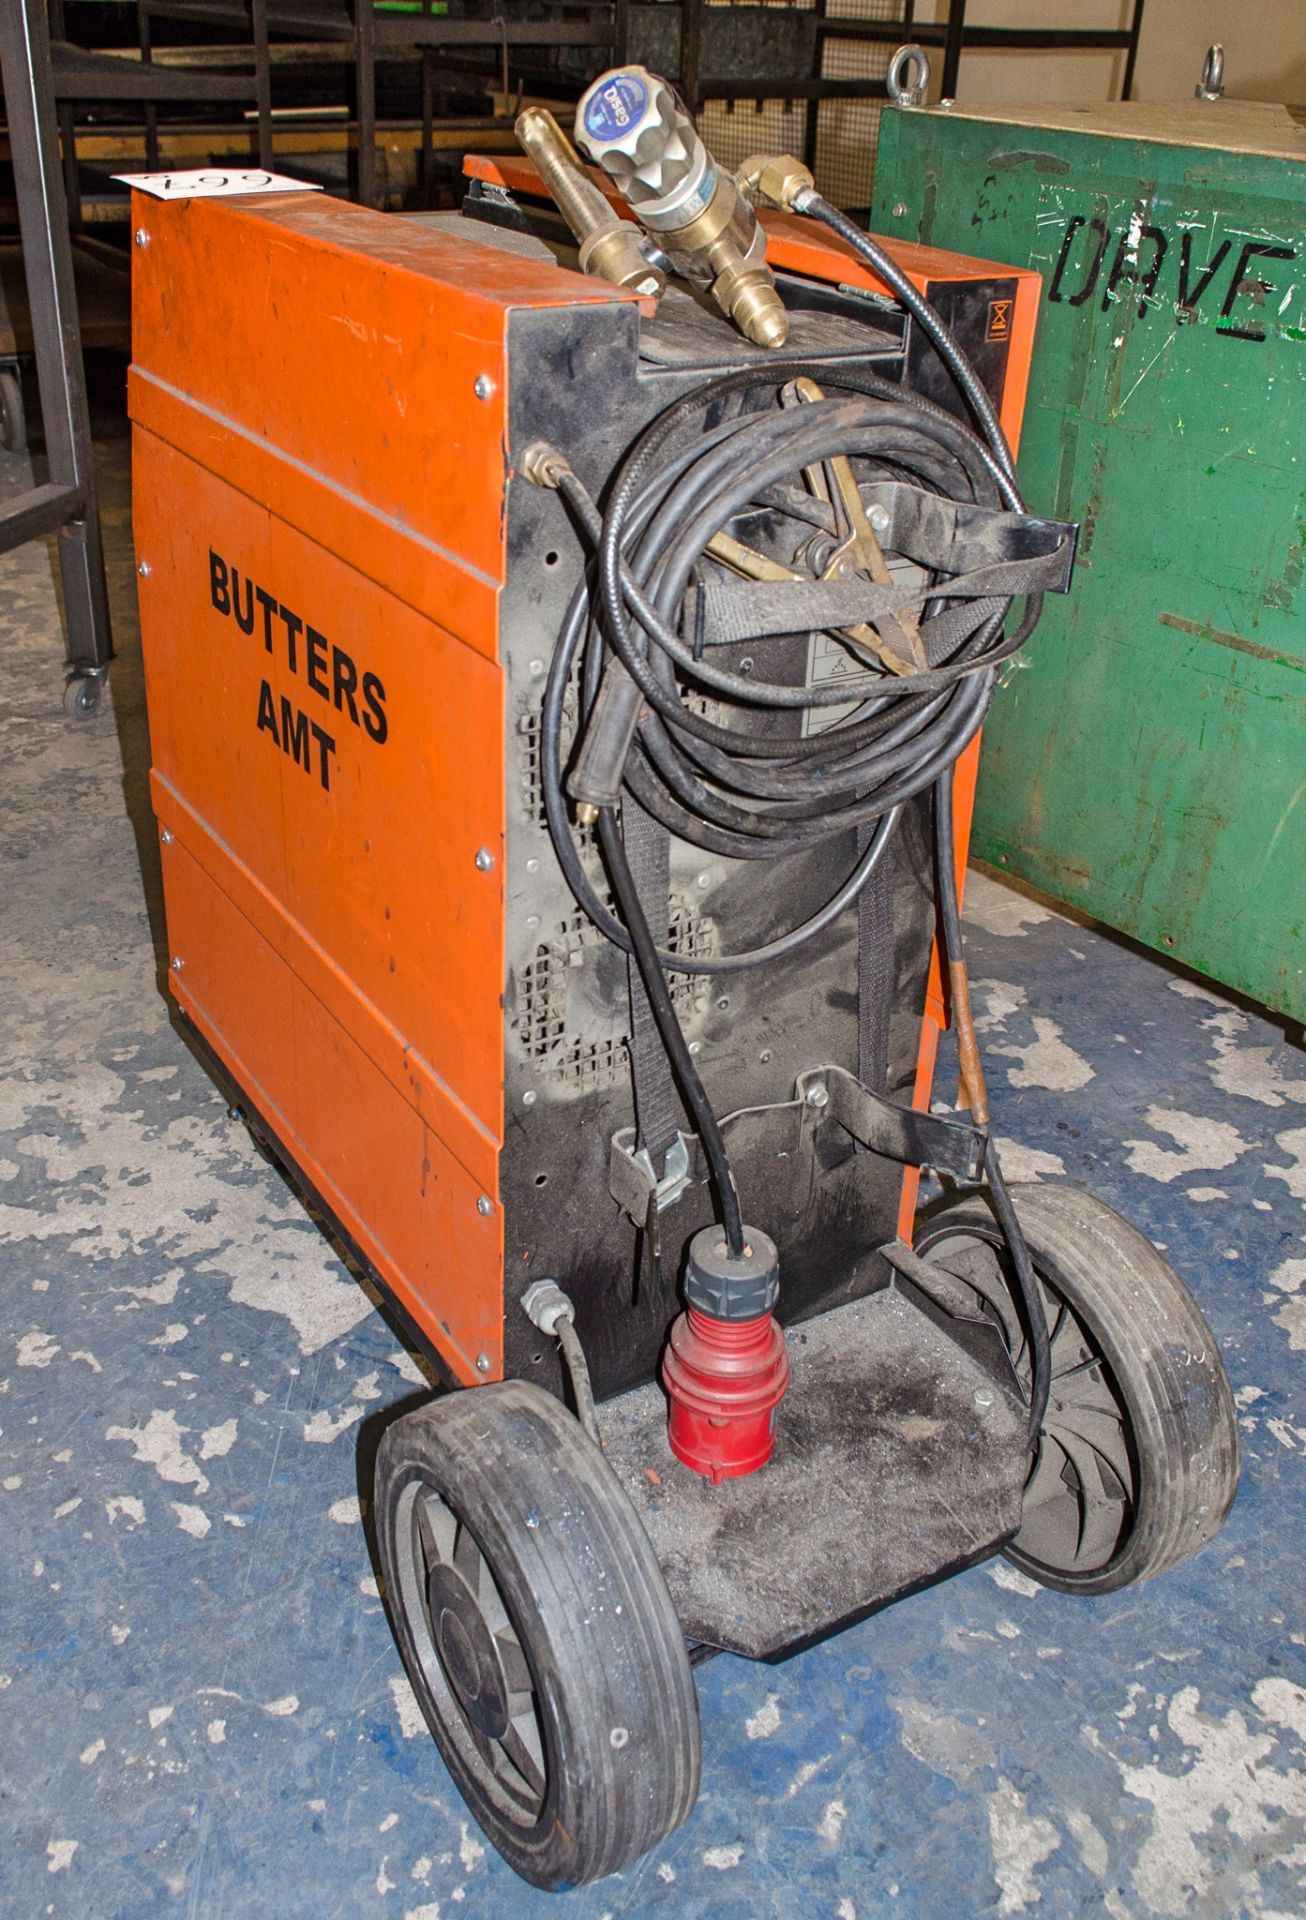 Butters AMT 260 mig welding set - Image 2 of 3